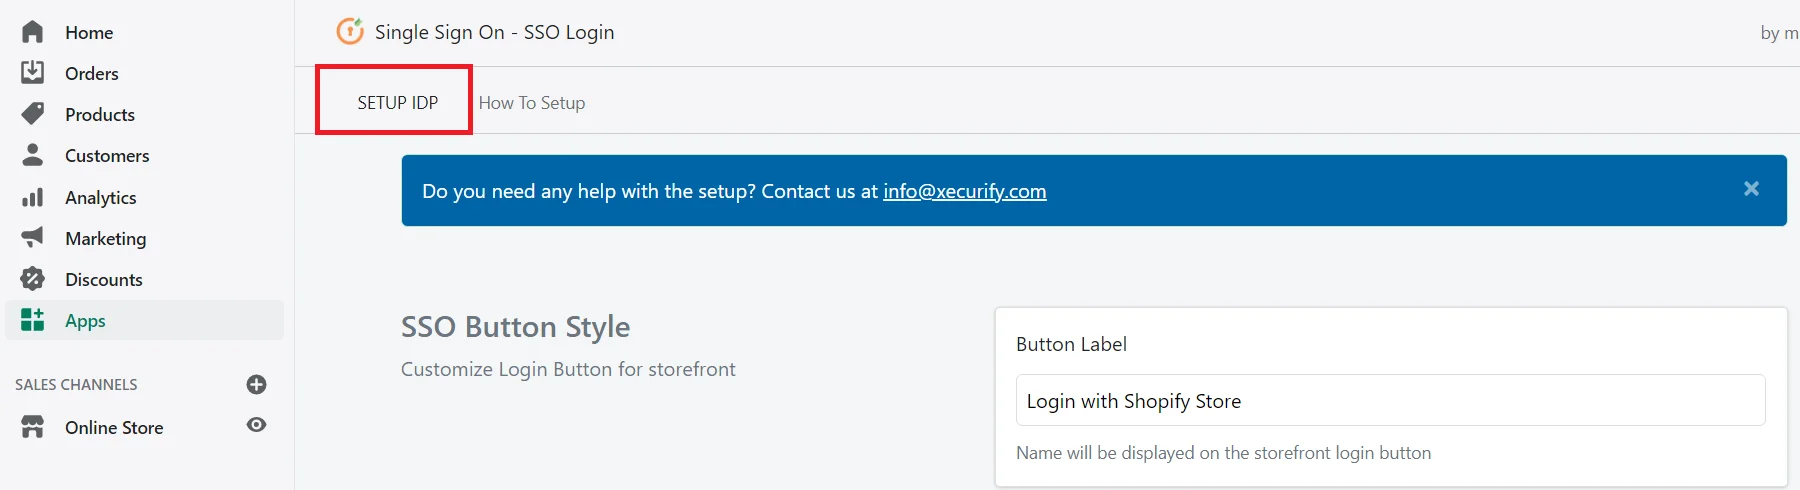 Shopify Single Sign-On (SSO) in wordpress oauth provider-setup idp